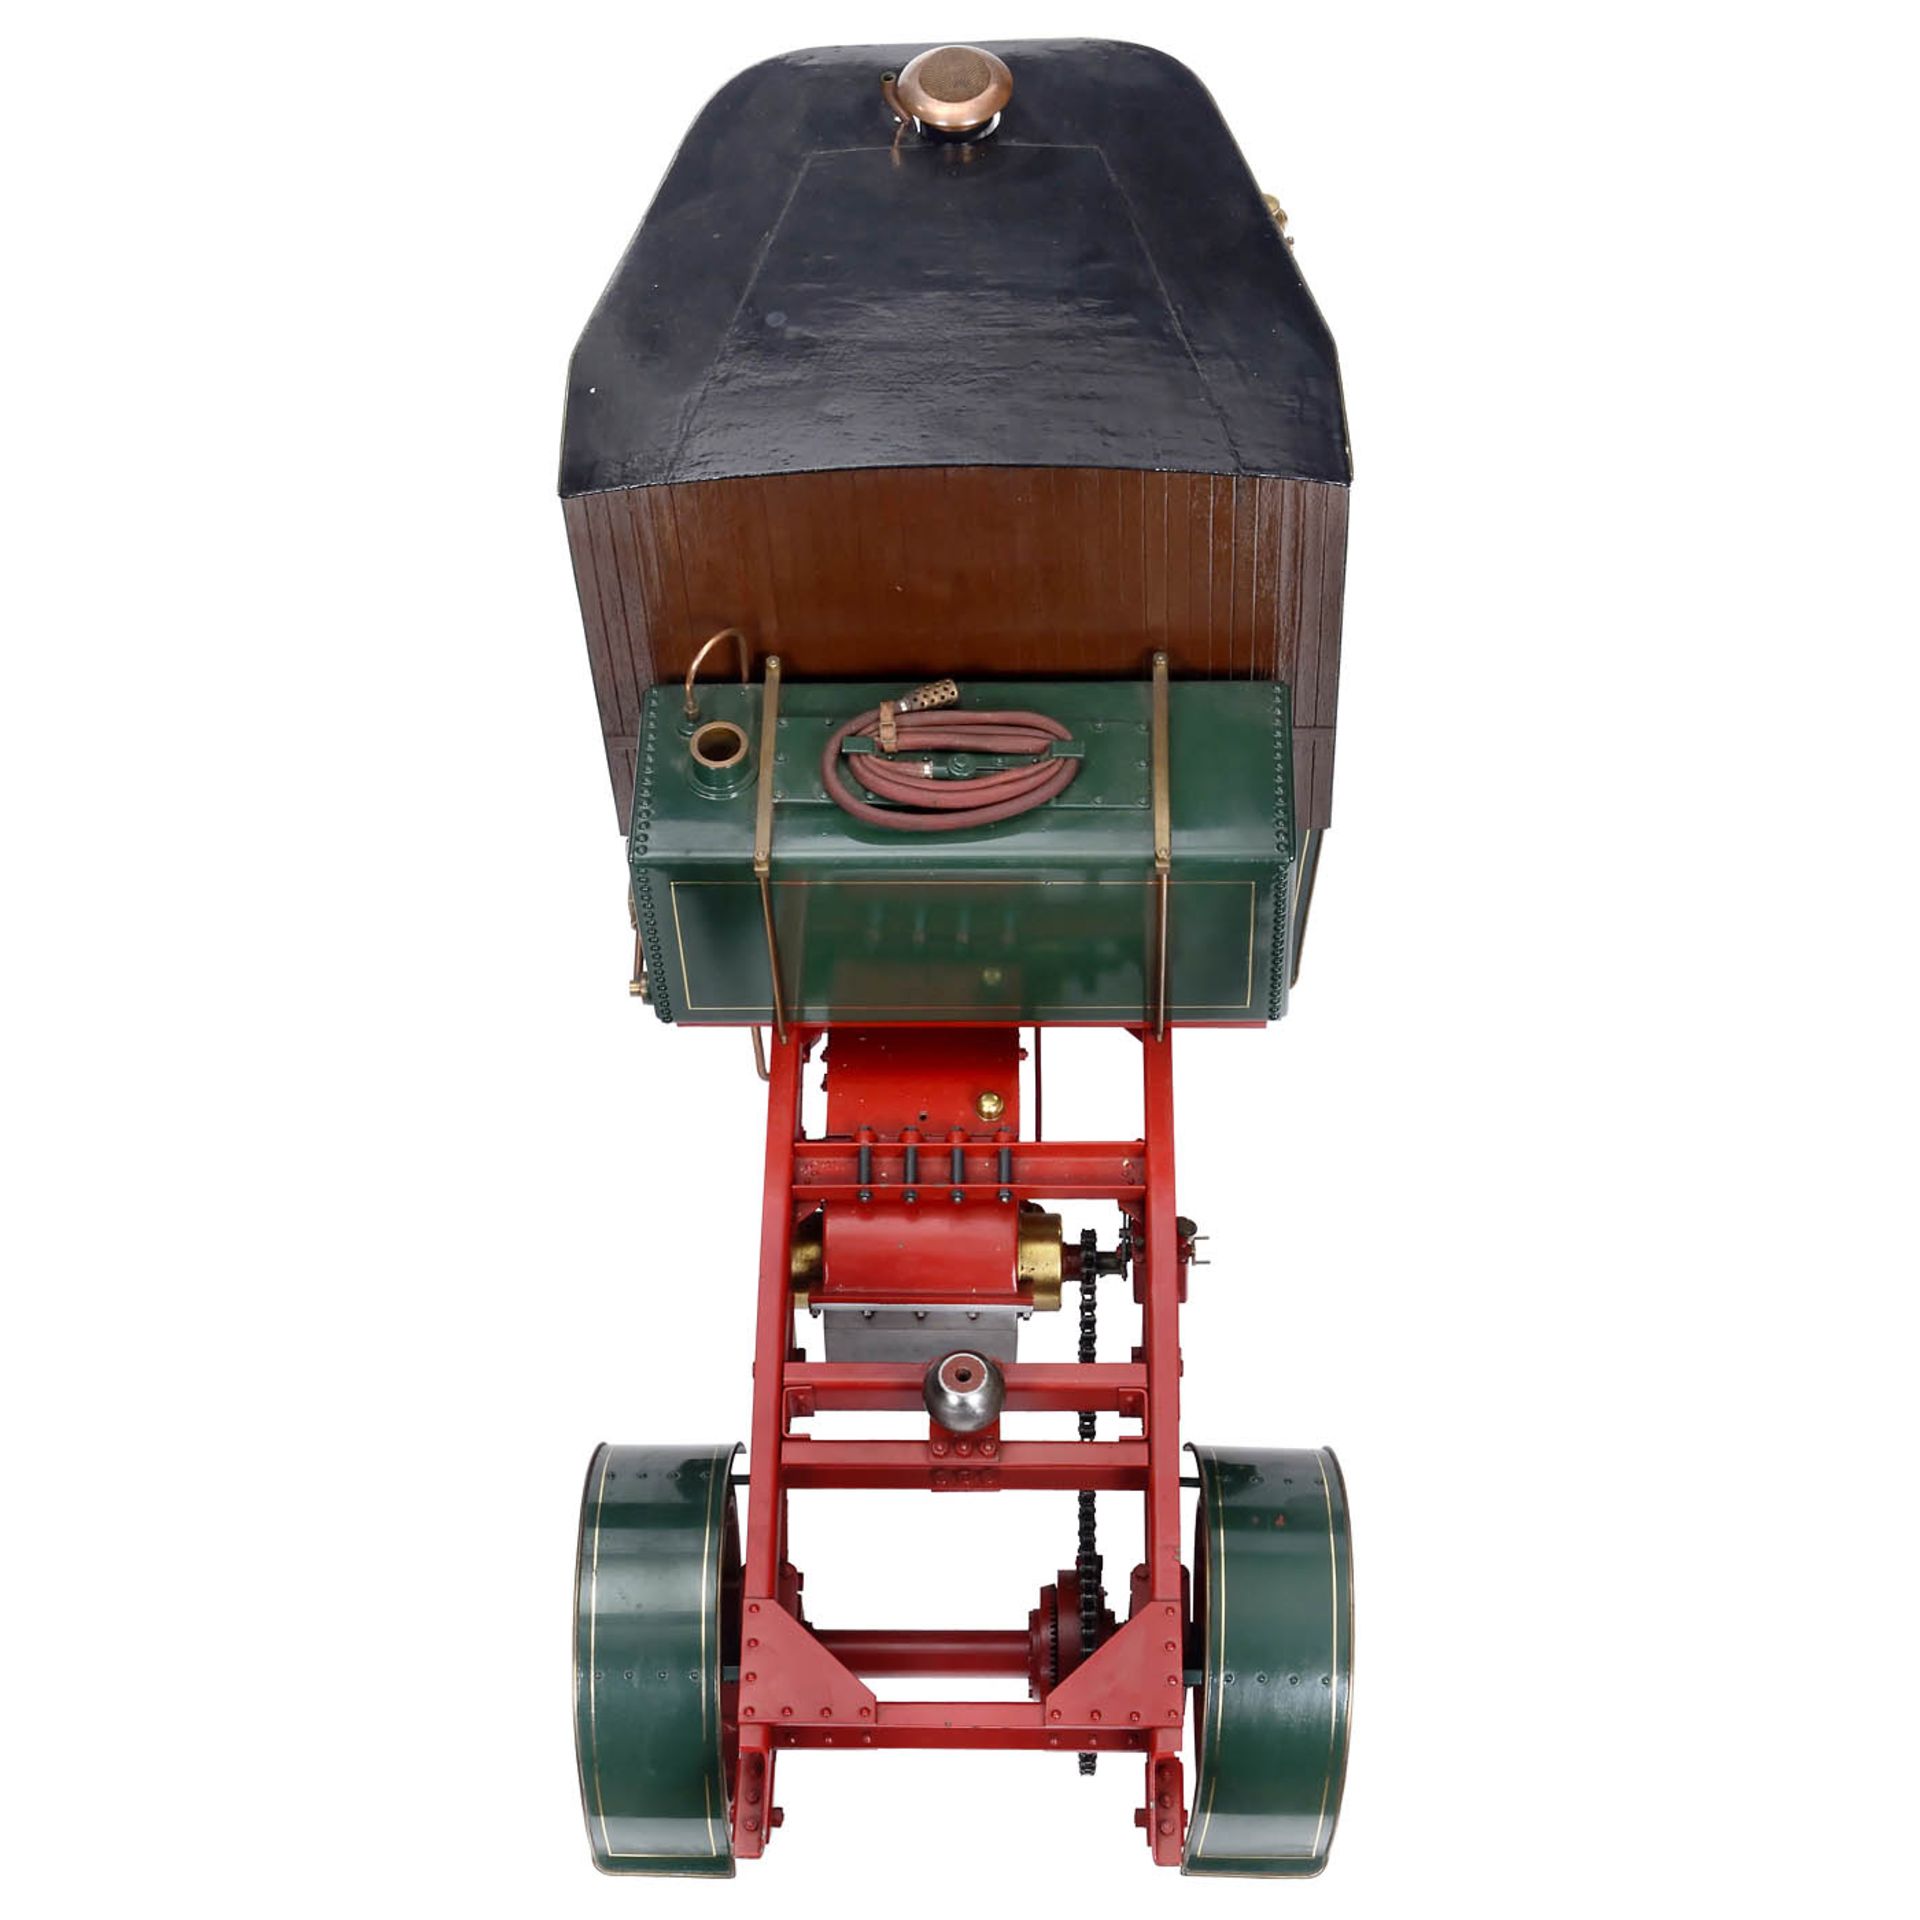 Two-Inch Scale Model of a Clayton Undertype No. 2 Steam Wagon with Trailer - Image 4 of 6